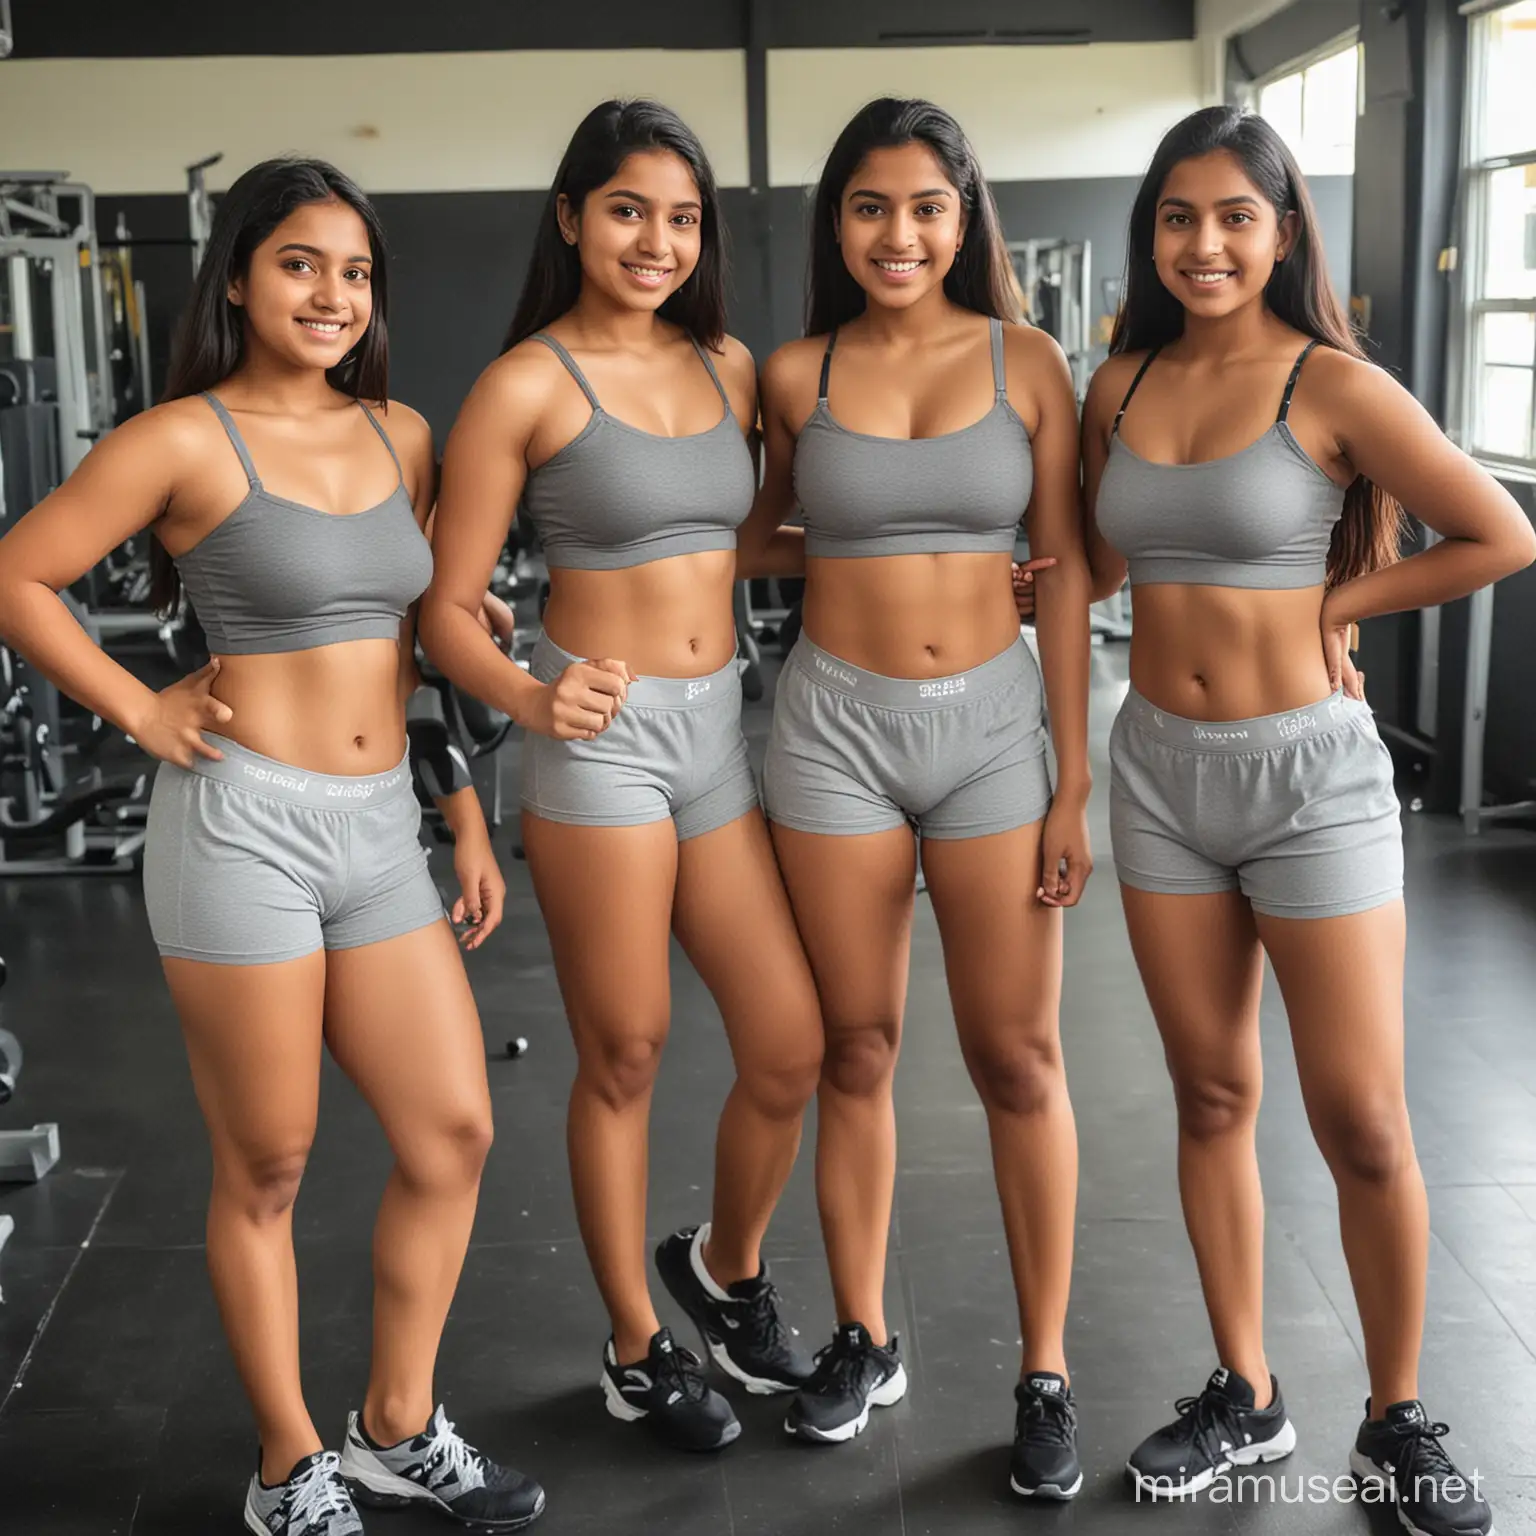 Indian School Girls in Gym Wear Four Friends in Grey Cotton Boxers and Strapless Bras